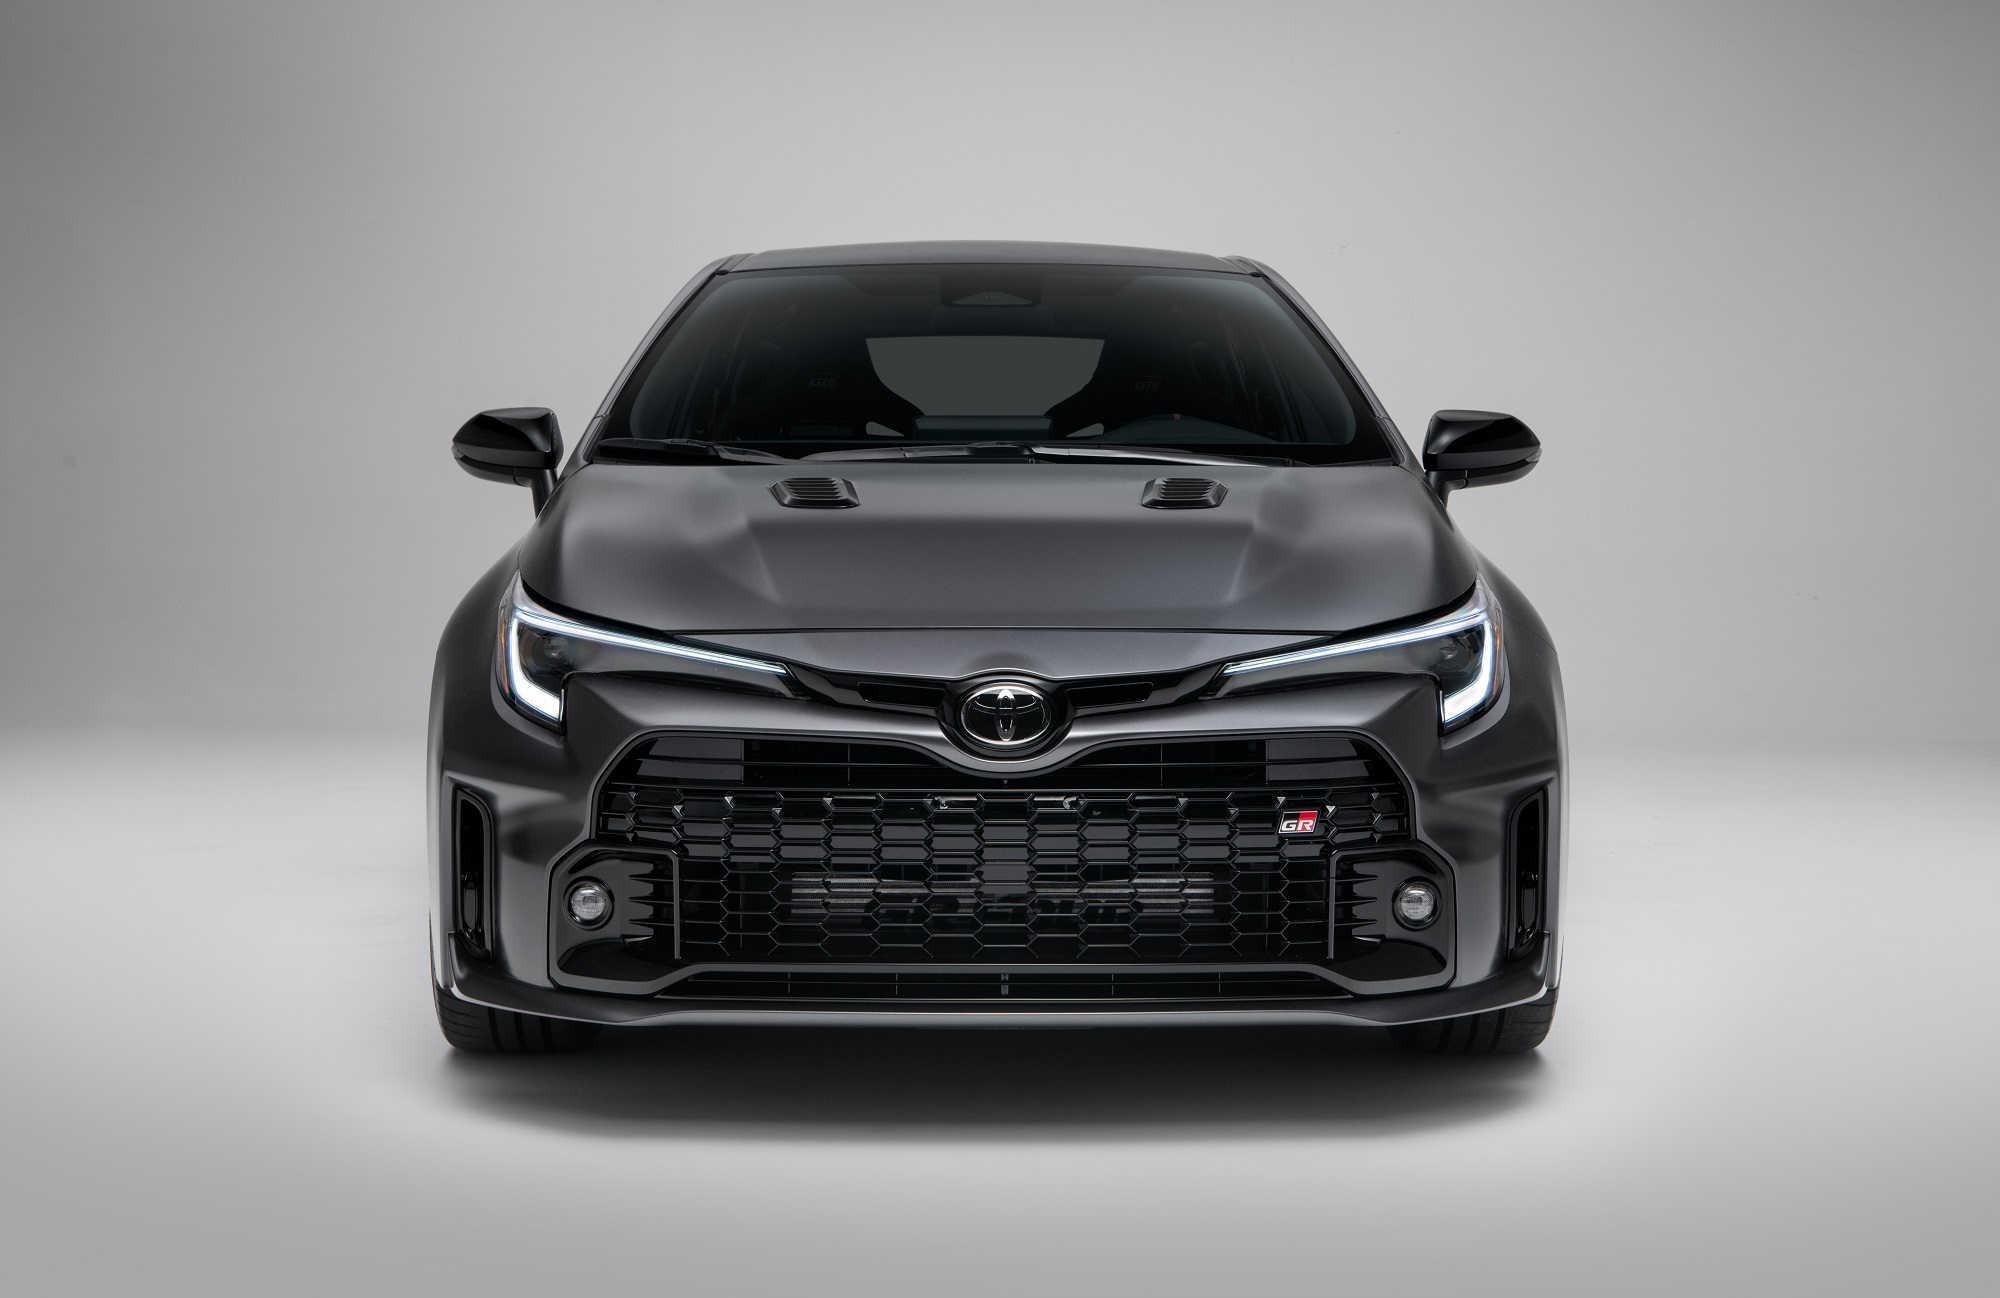 The new Toyota Corolla GR MORIZO Edition hatchback's front end is angry-looking.